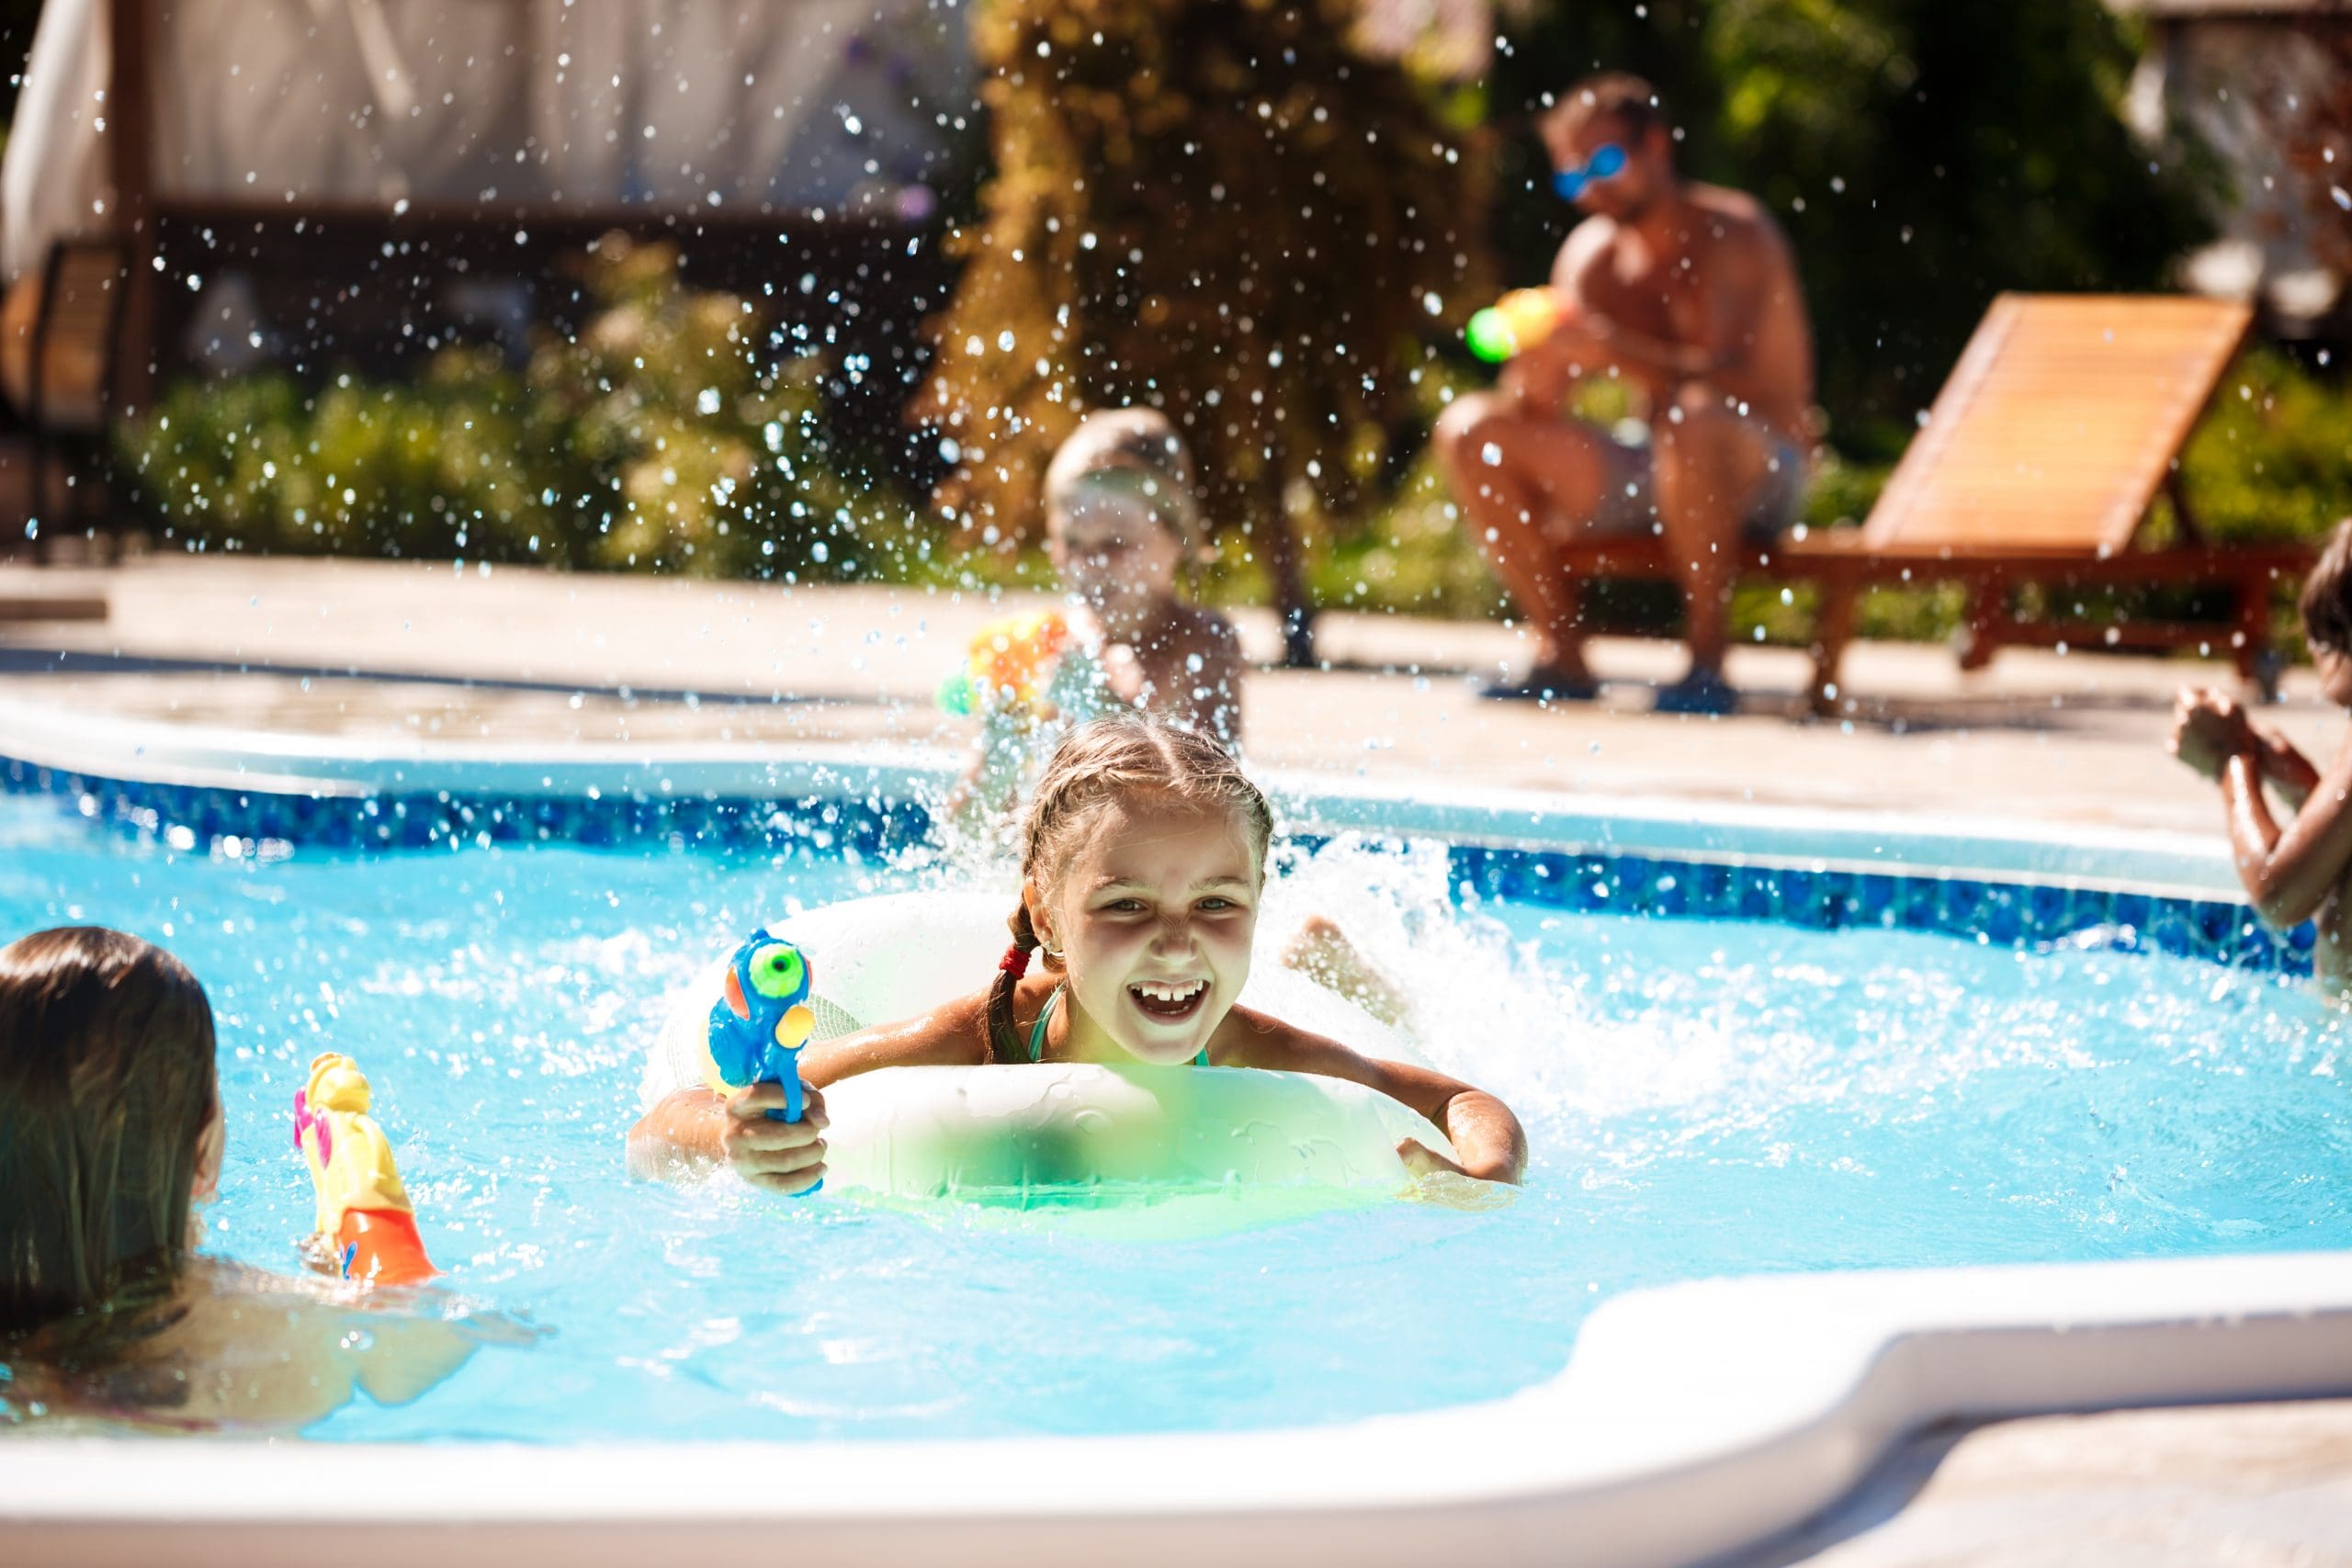 children laughing and playing in clean and maintained swimming pool